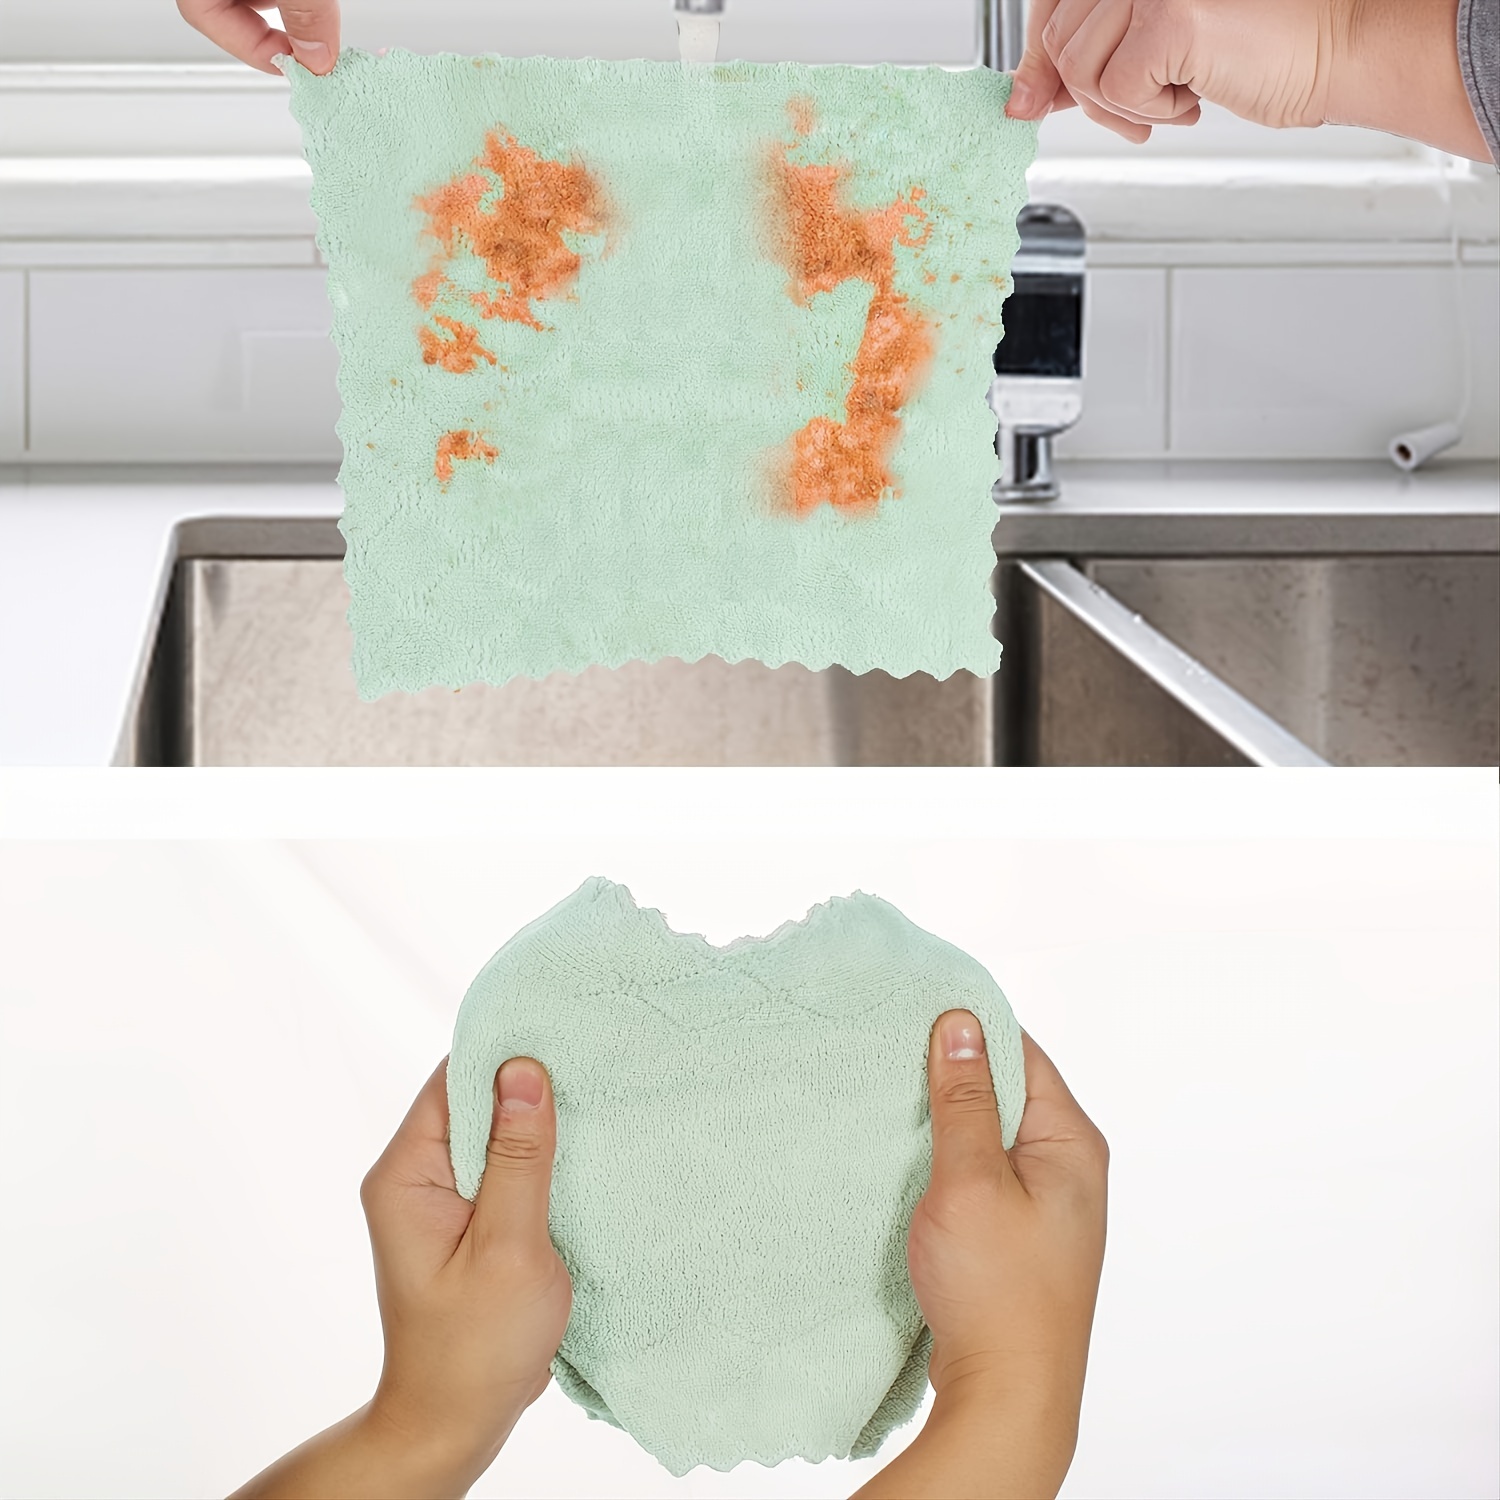 Kitchen Towels Cleaning Cloth - 9.8x9.8 in Dish Towels, Super Absorbent Coral Velvet Dish Cloths, Cleaning Supplies for Cleaning Kitchen Tableware (10